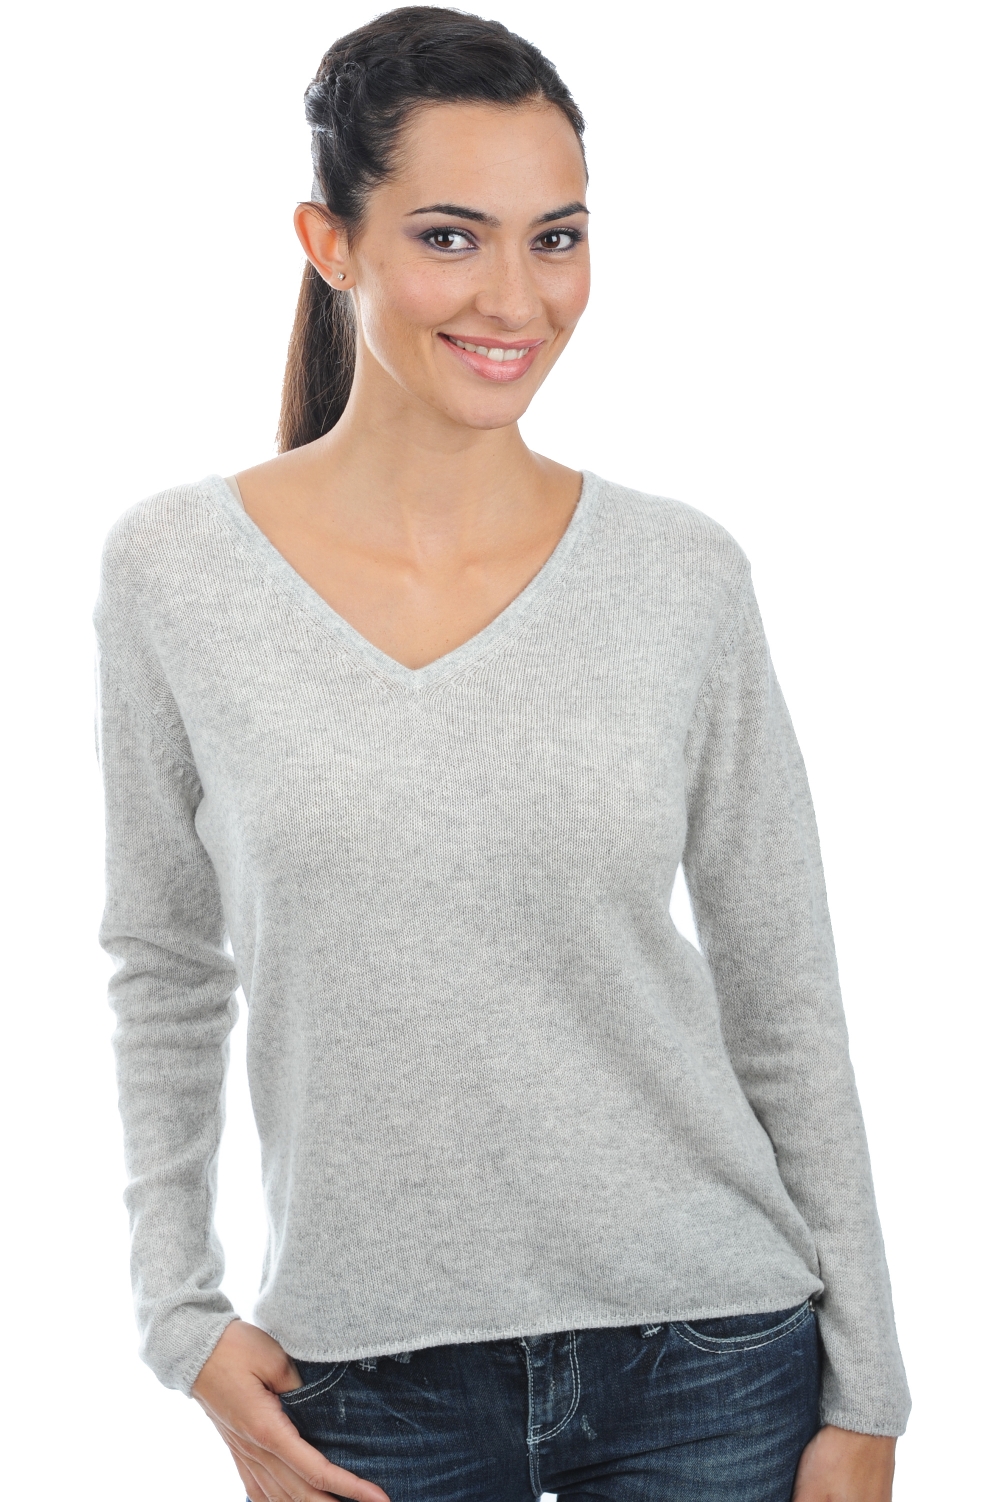 Cashmere ladies basic sweaters at low prices flavie flanelle chine xl